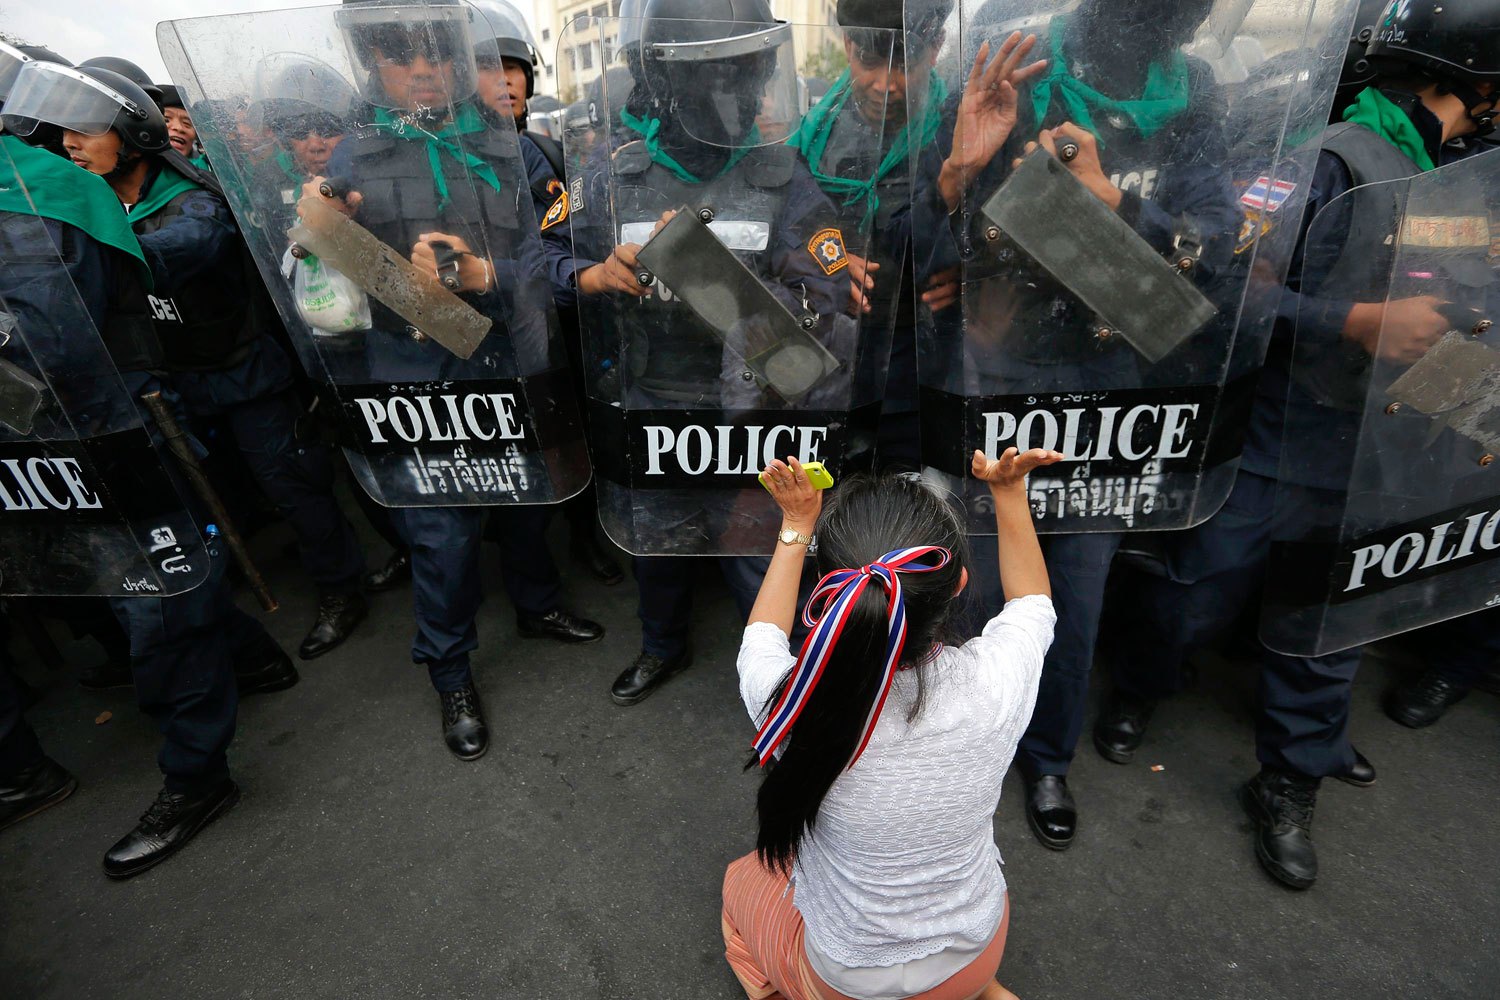 An anti-government protester pushes a line of policemen during clashes near the Government House in Bangkok, on Febr. 18, 2014.